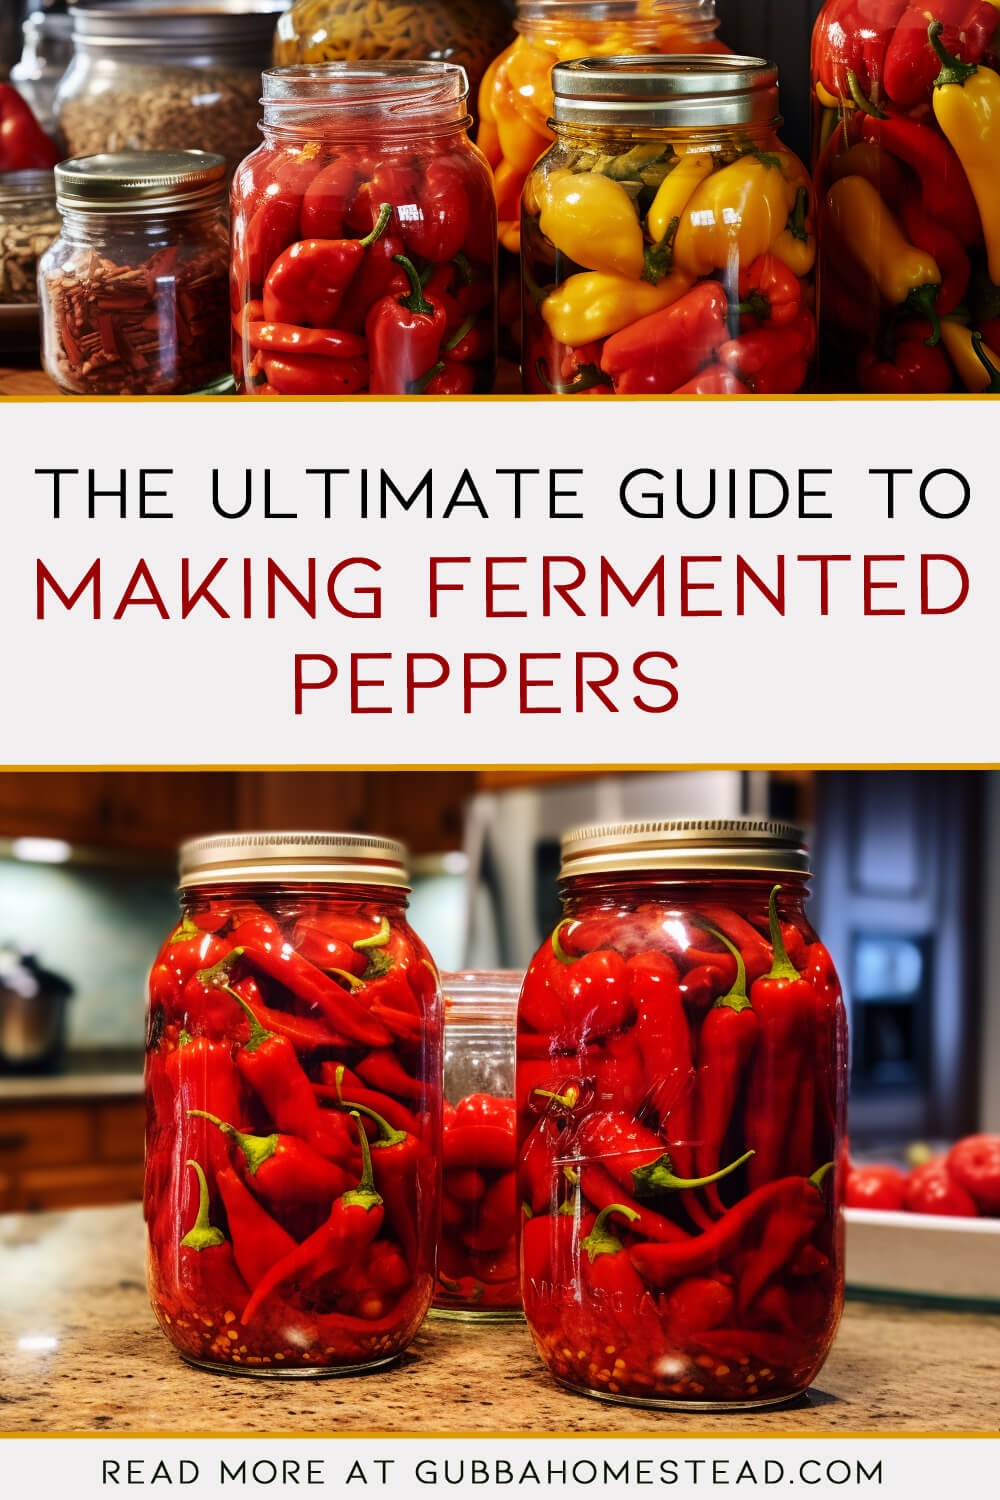 The Ultimate Guide to Making Fermented Peppers